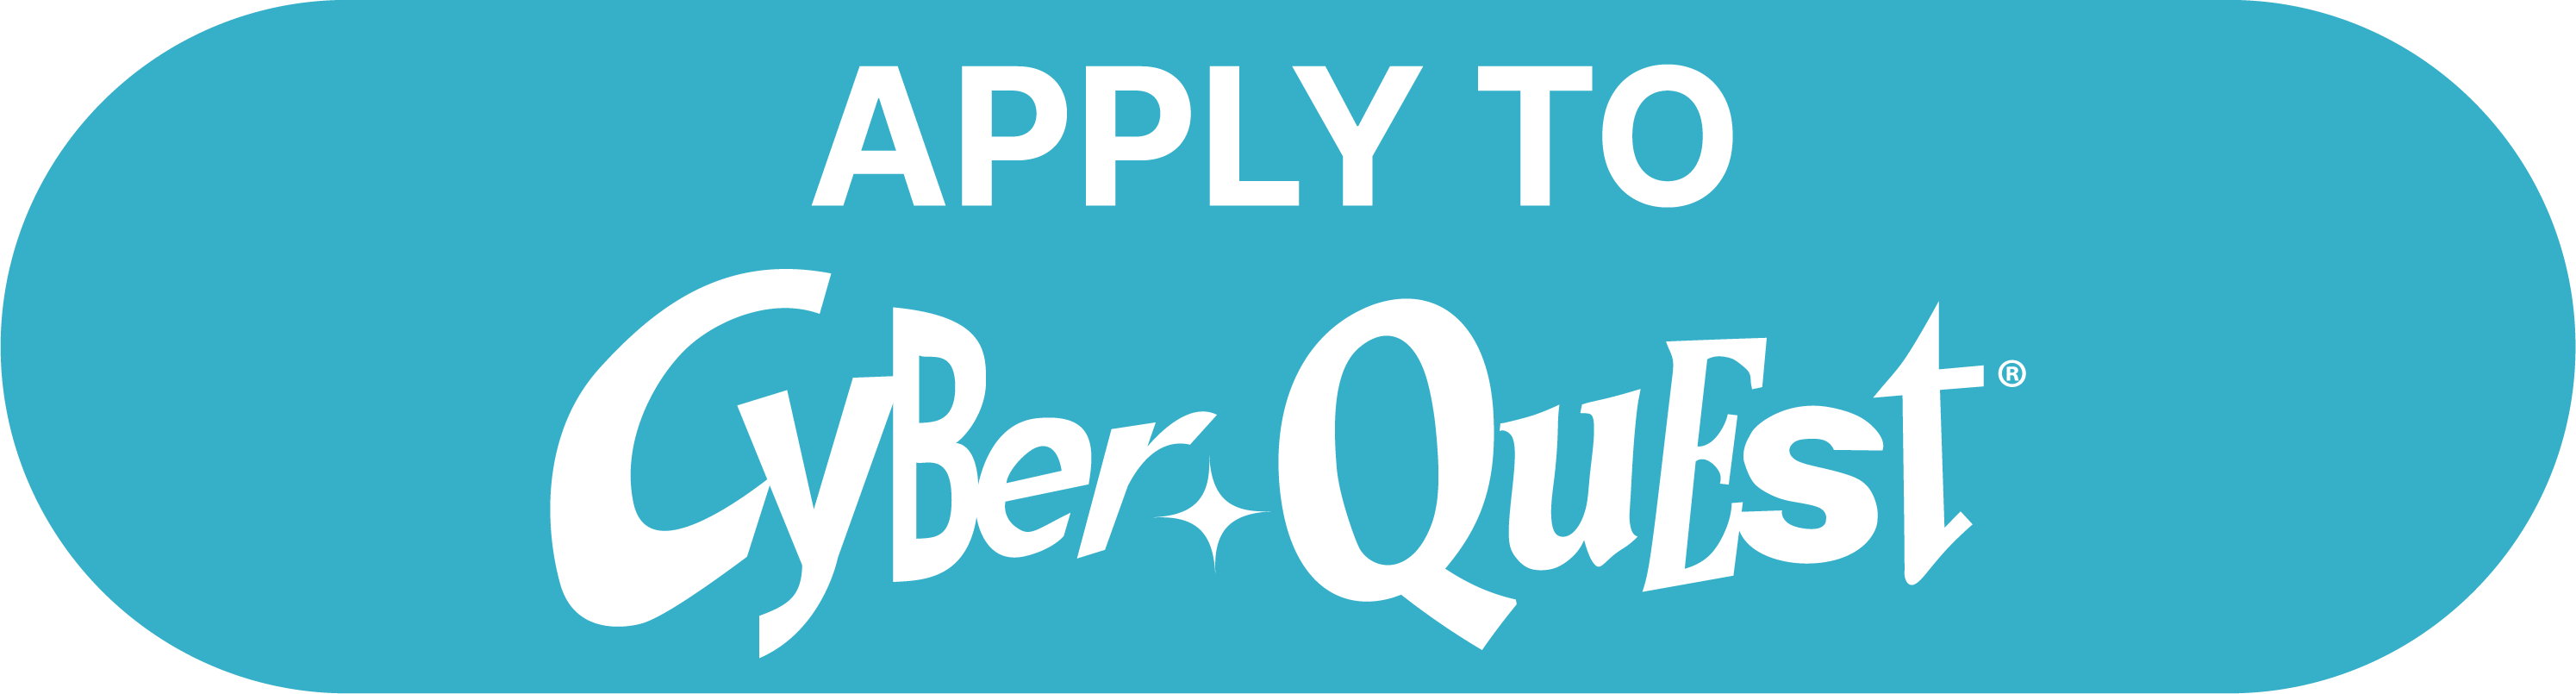 Apply to Cyber Quest